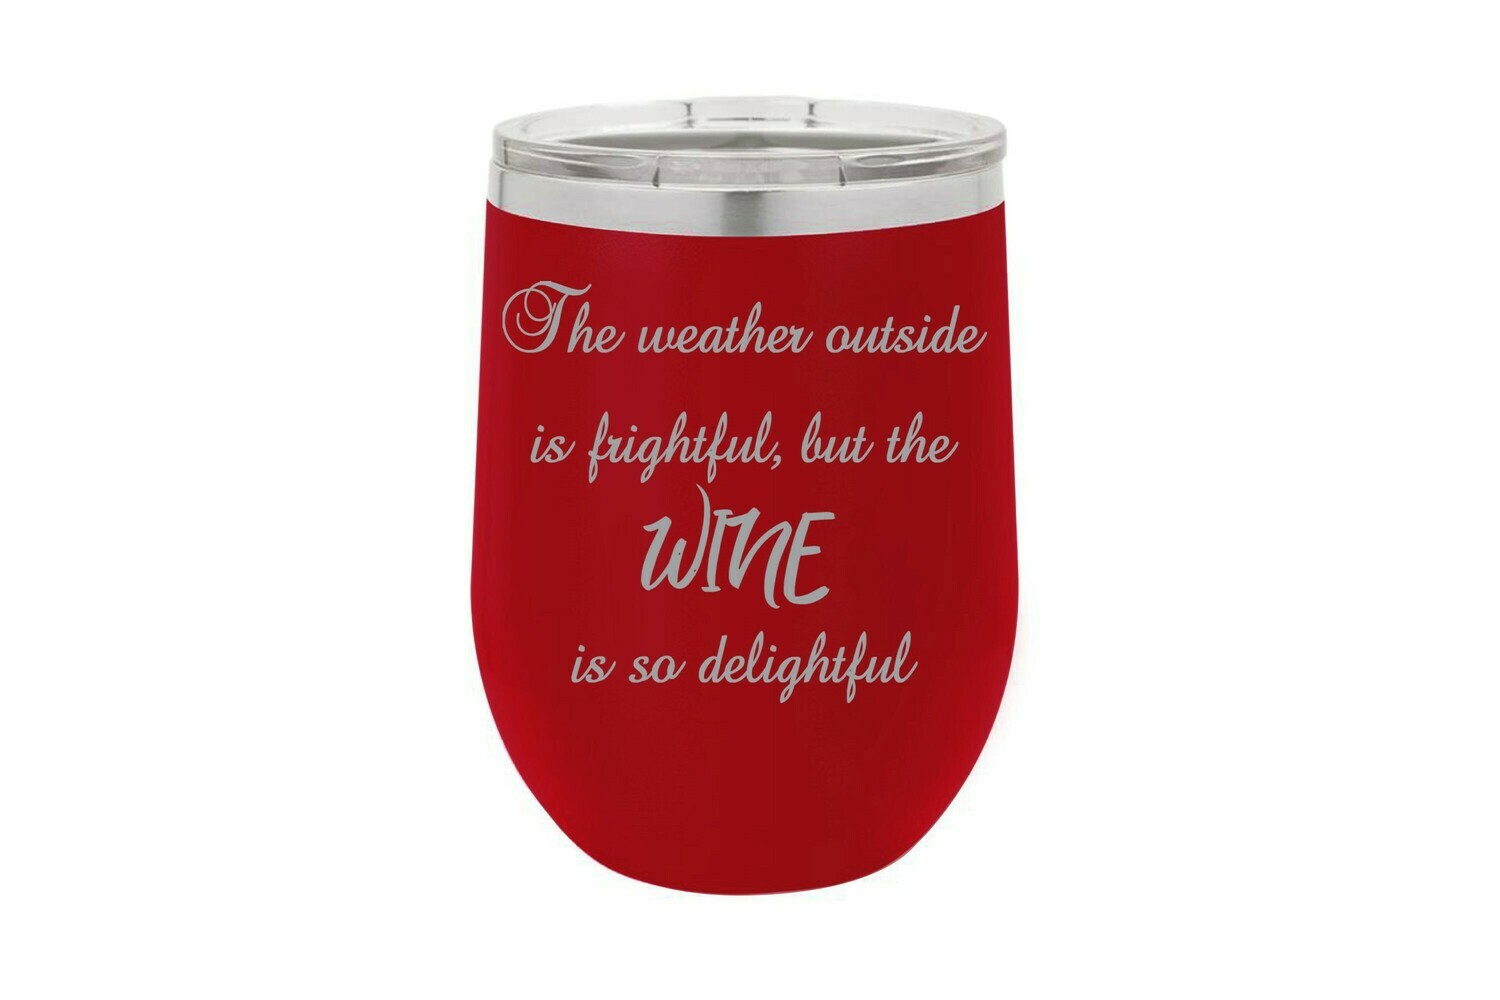 The Weather Outside is Frightful, but the Wine is so delightful Insulated Tumbler 12 oz